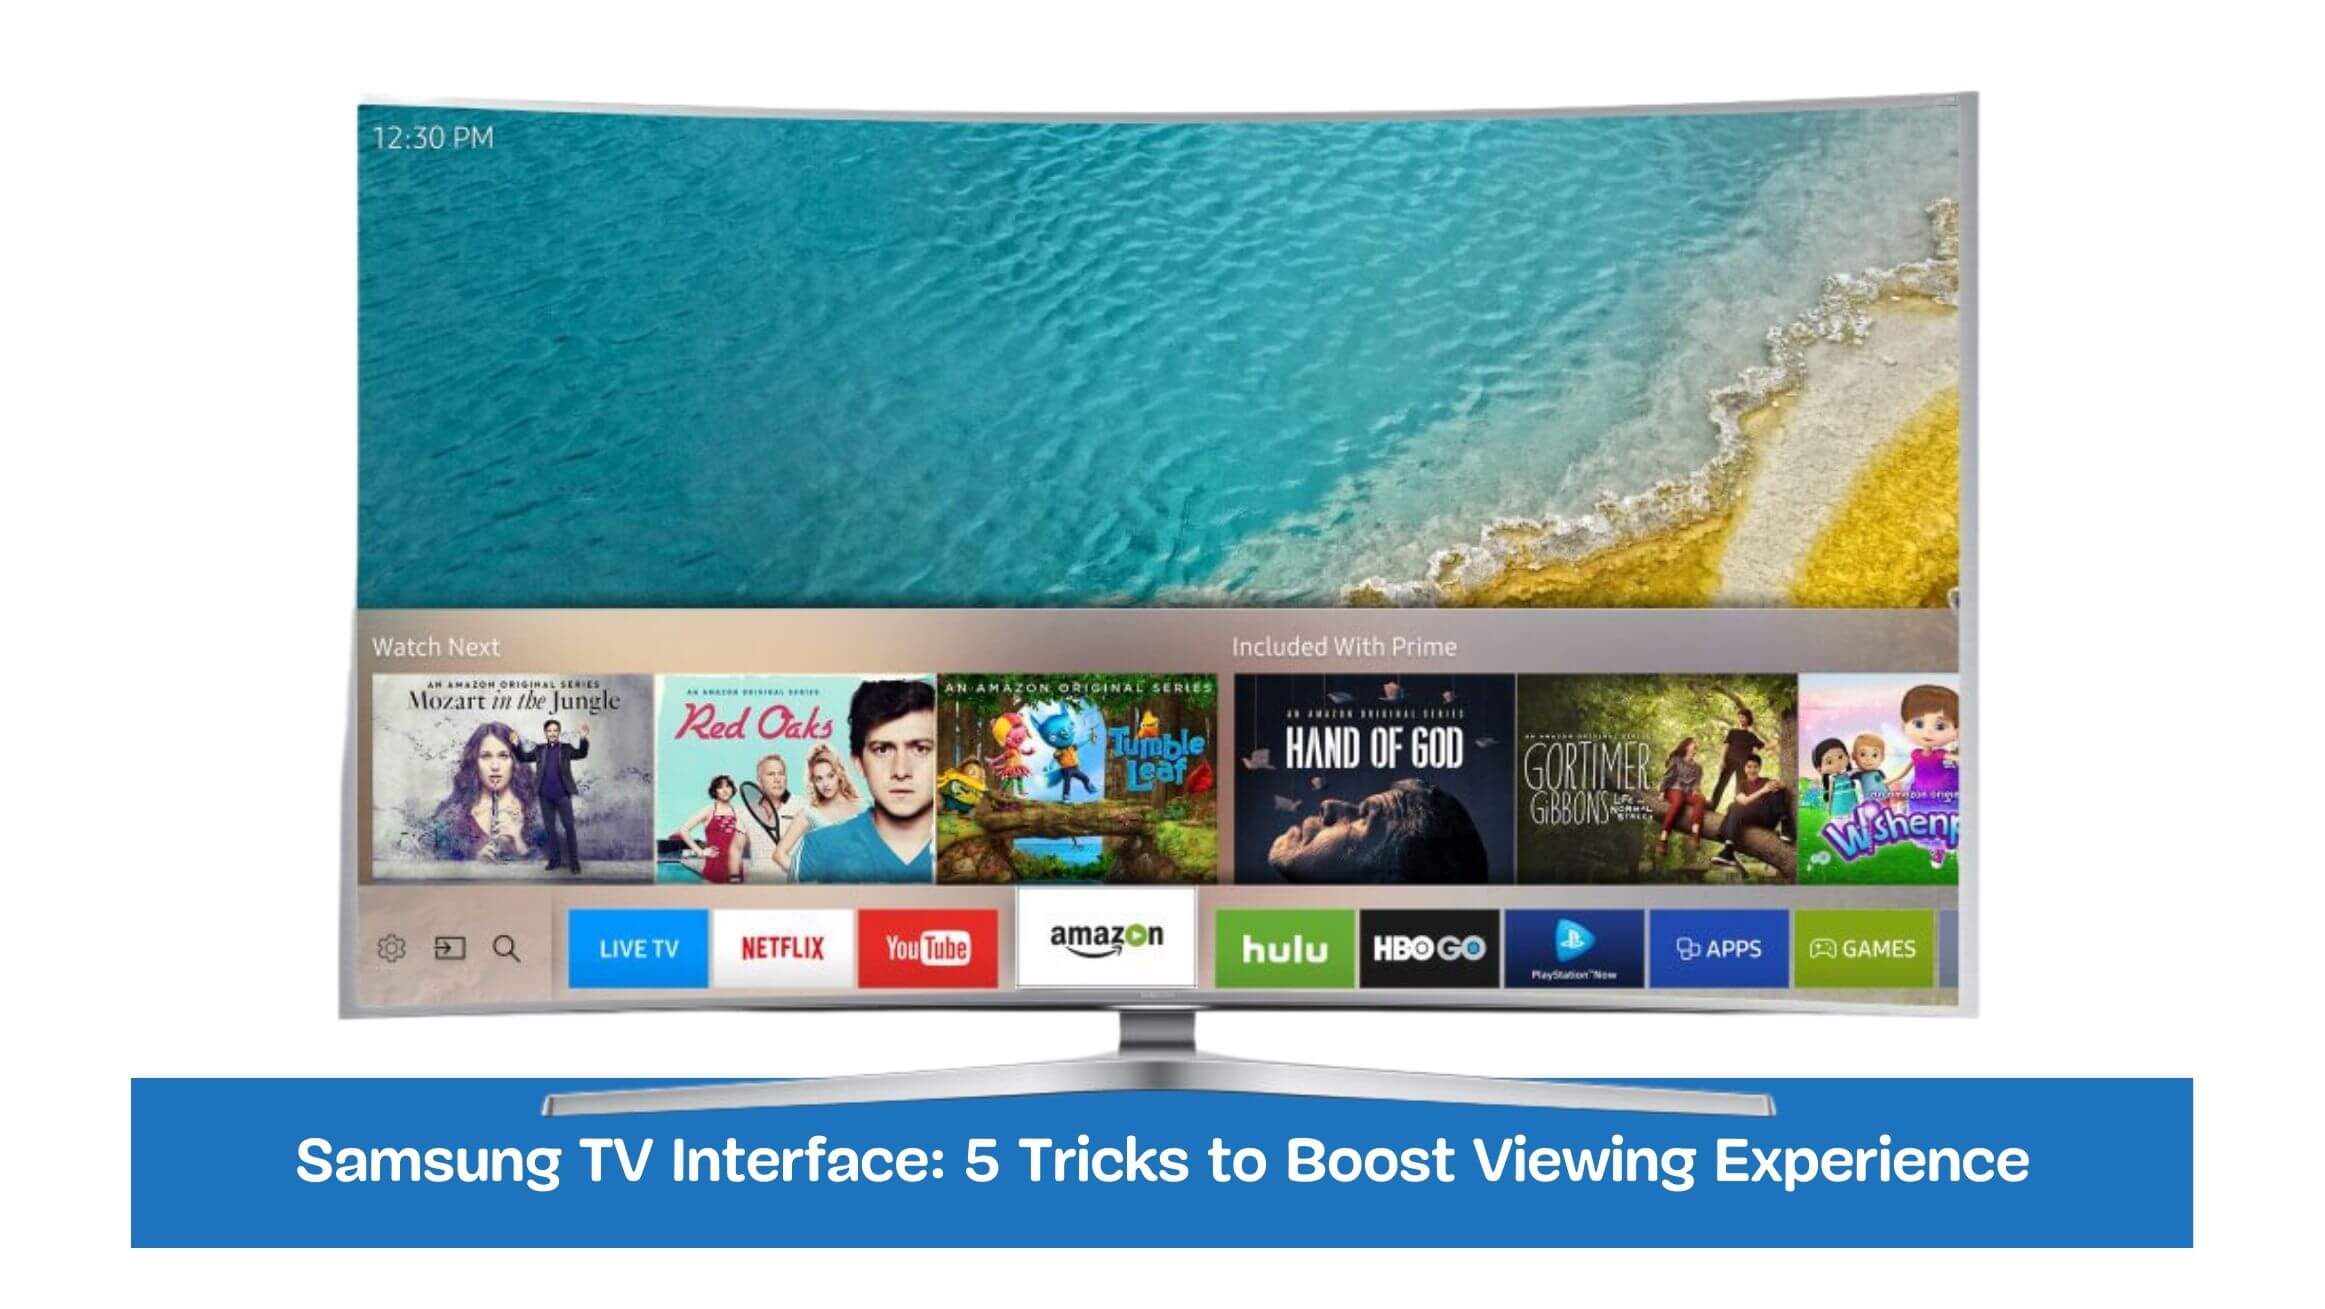 Samsung TV Interface: 5 Tricks to Boost Viewing Experience